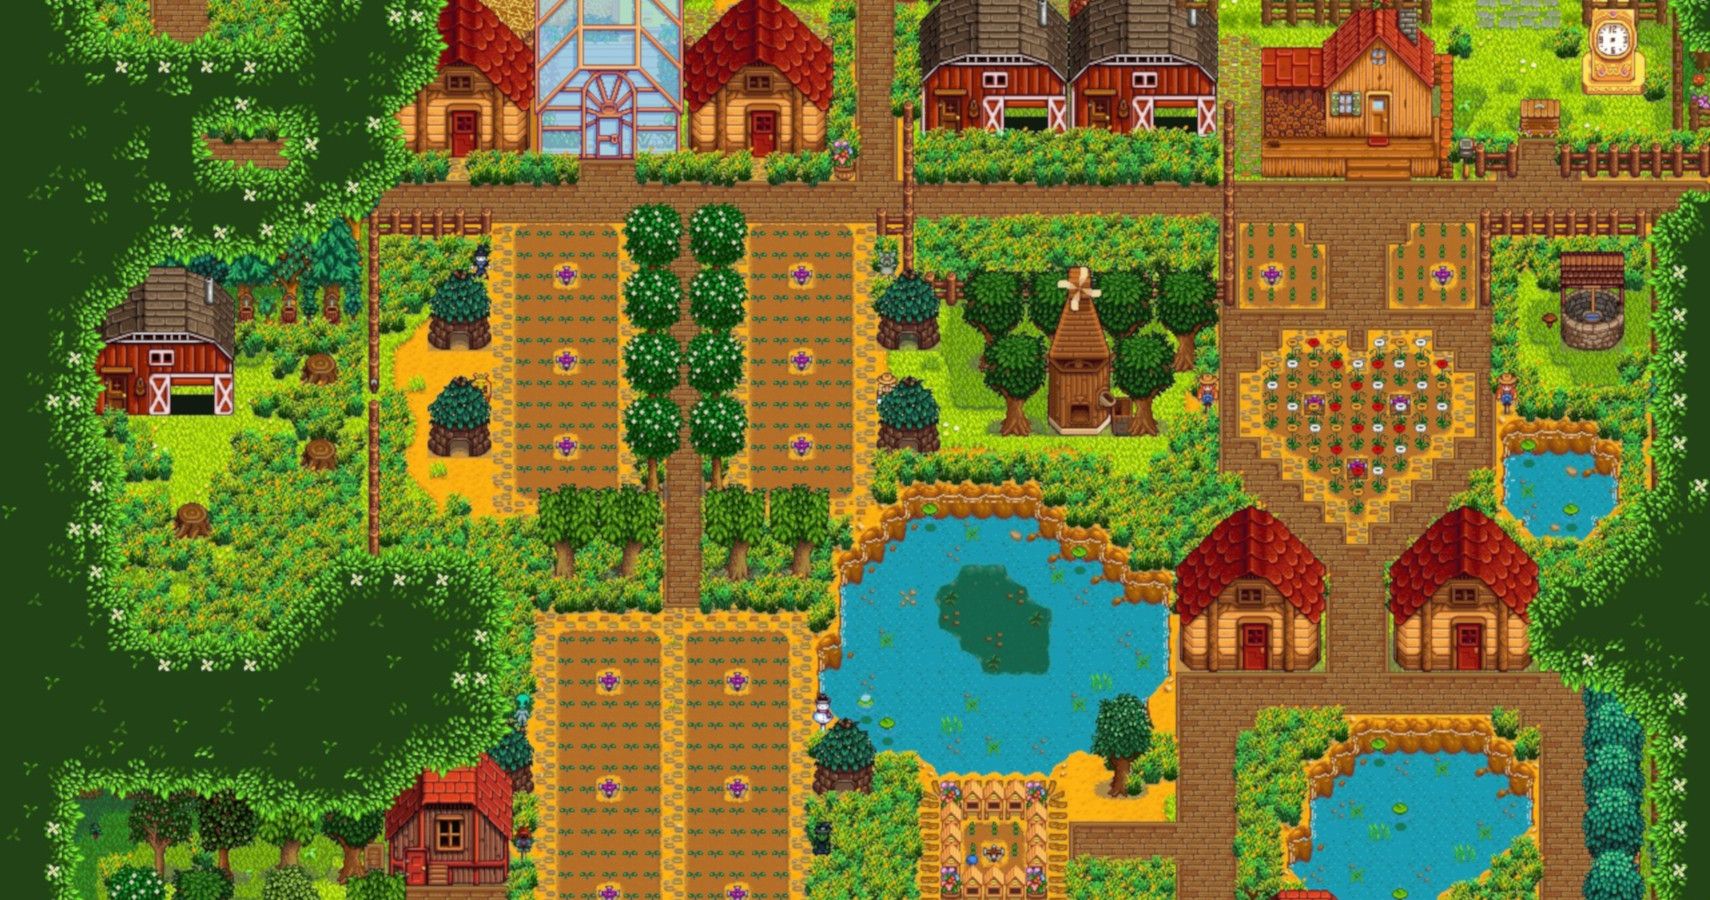 This adorable farming sim might just be the ultimate Stardew Valley dupe